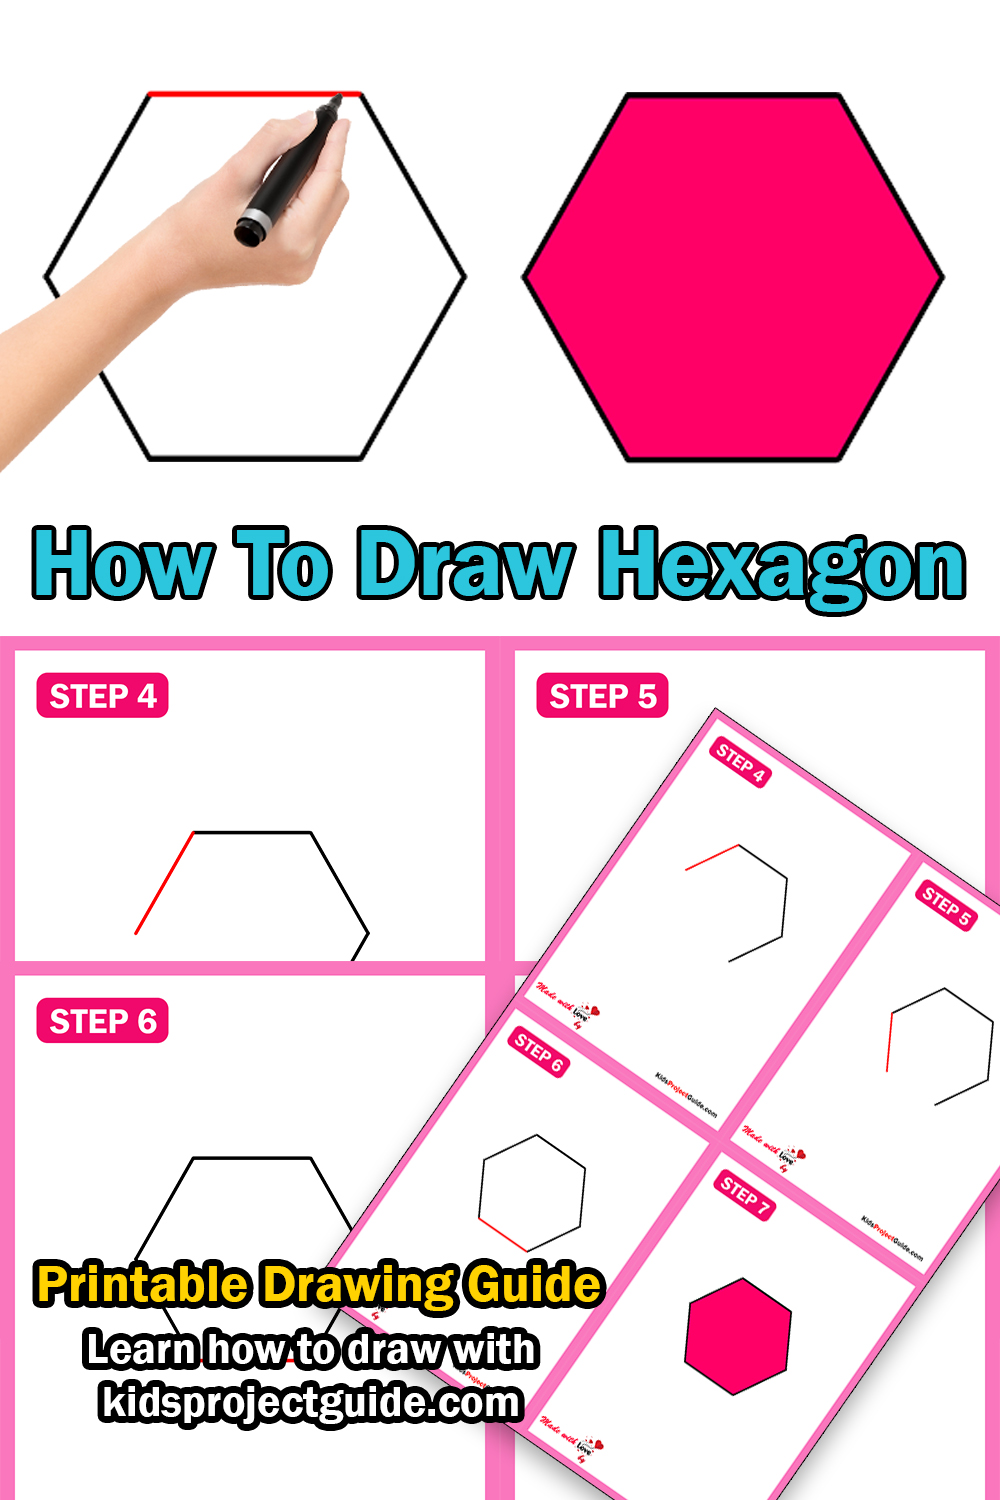 How To Draw a Hexagon Easy Step By Step Guide